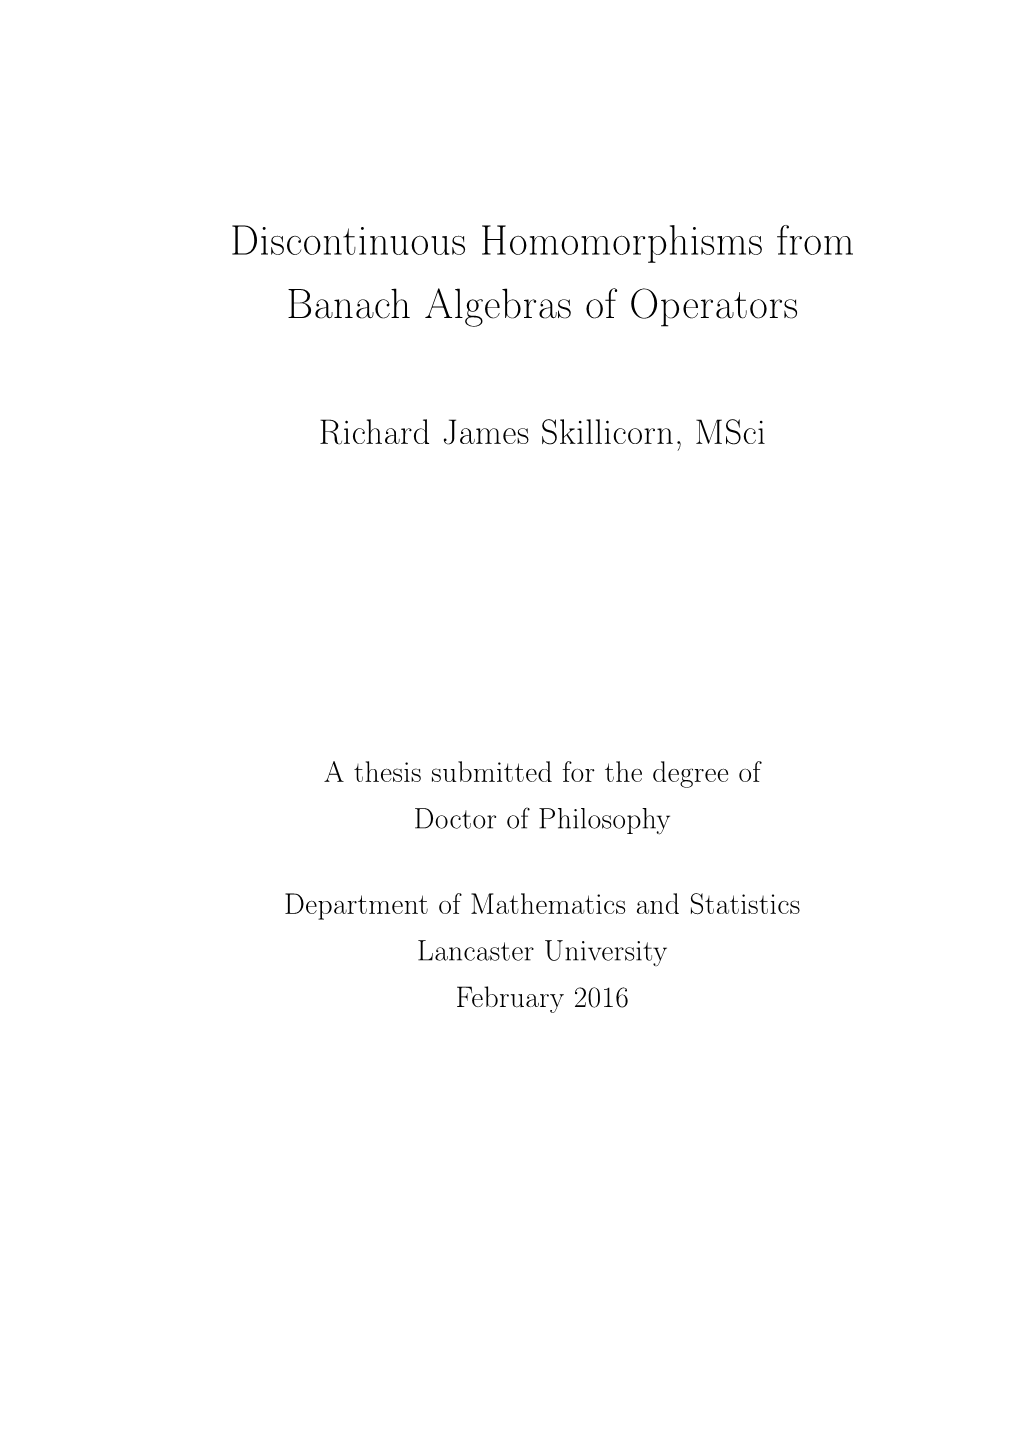 Discontinuous Homomorphisms from Banach Algebras of Operators